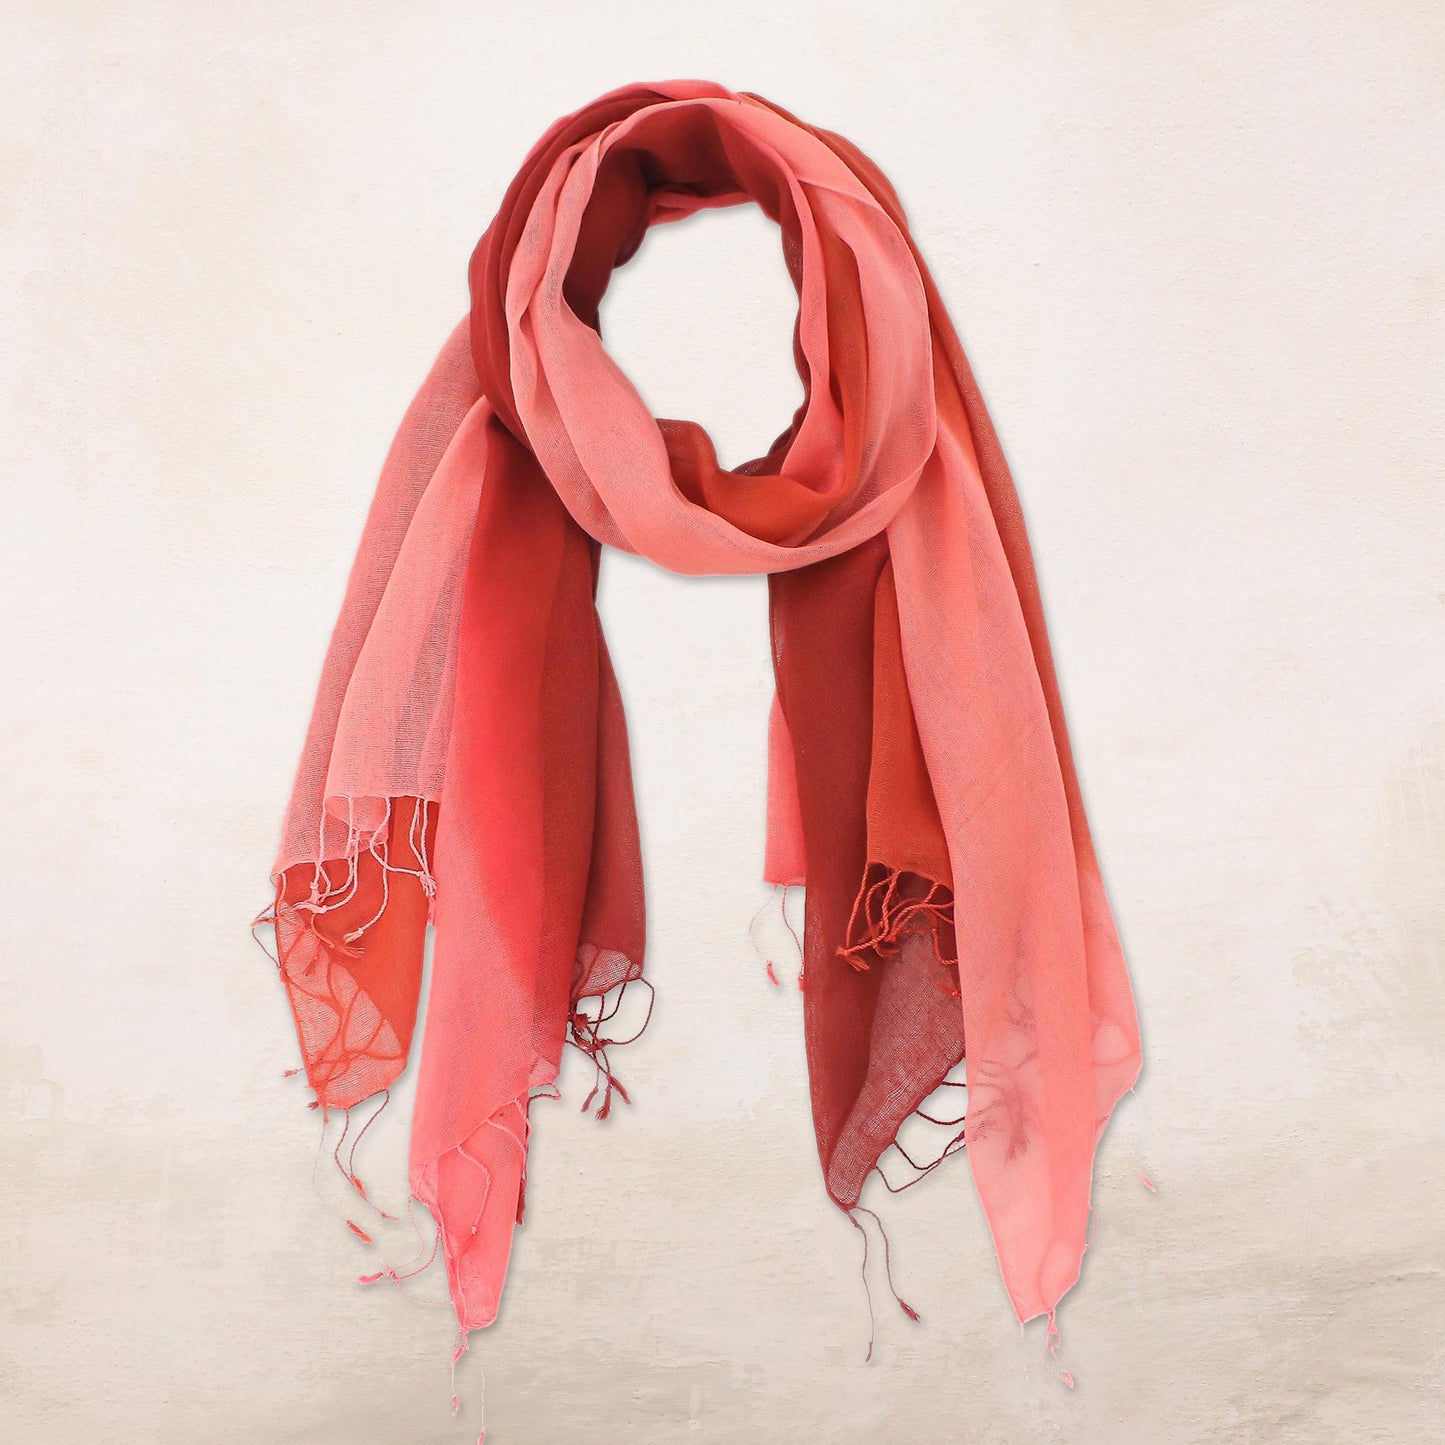 Delightful Breeze in Red Cotton Wrap Scarves in Red Pink and Orange (Pair)